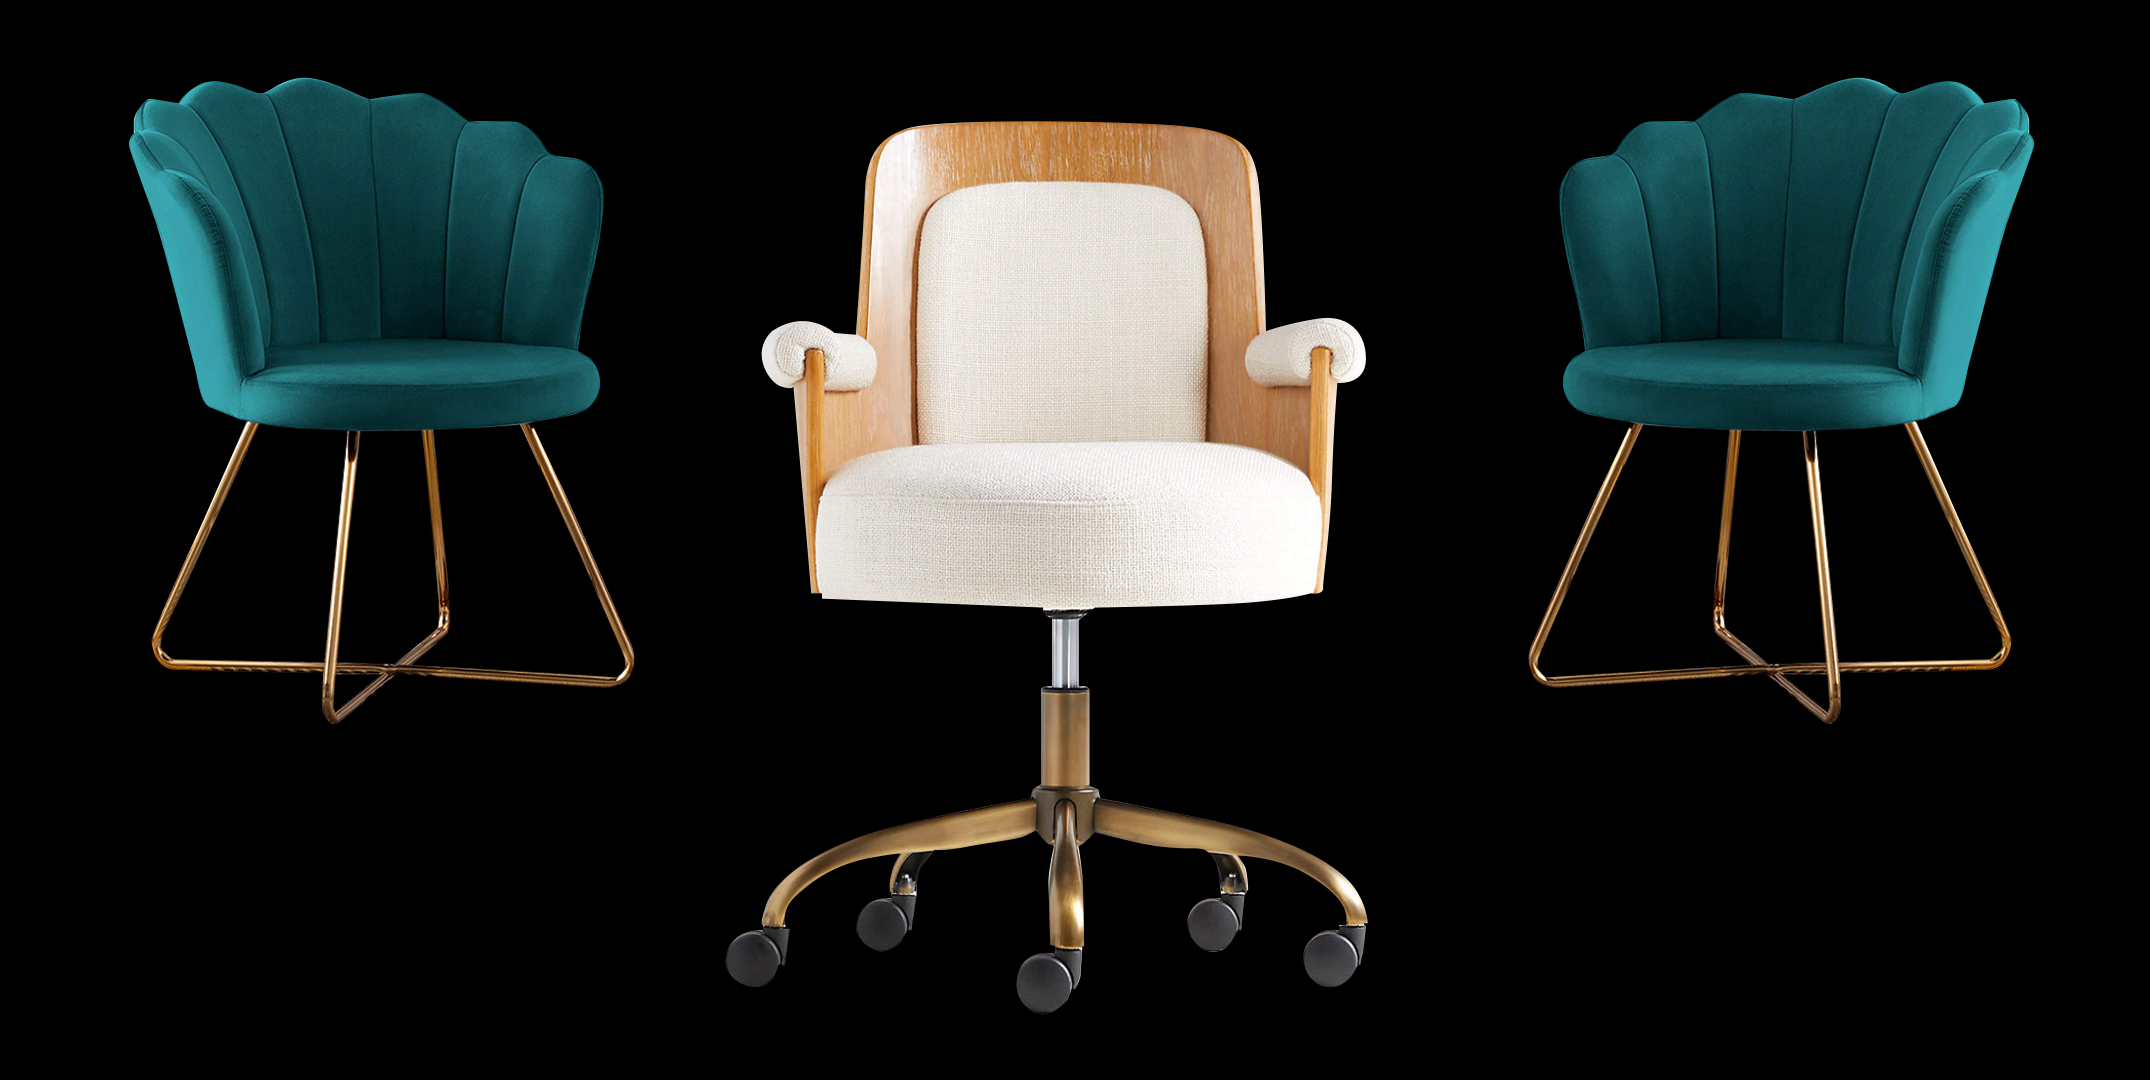 Stylish & Affordable Home Office Chairs - Life On Virginia Street